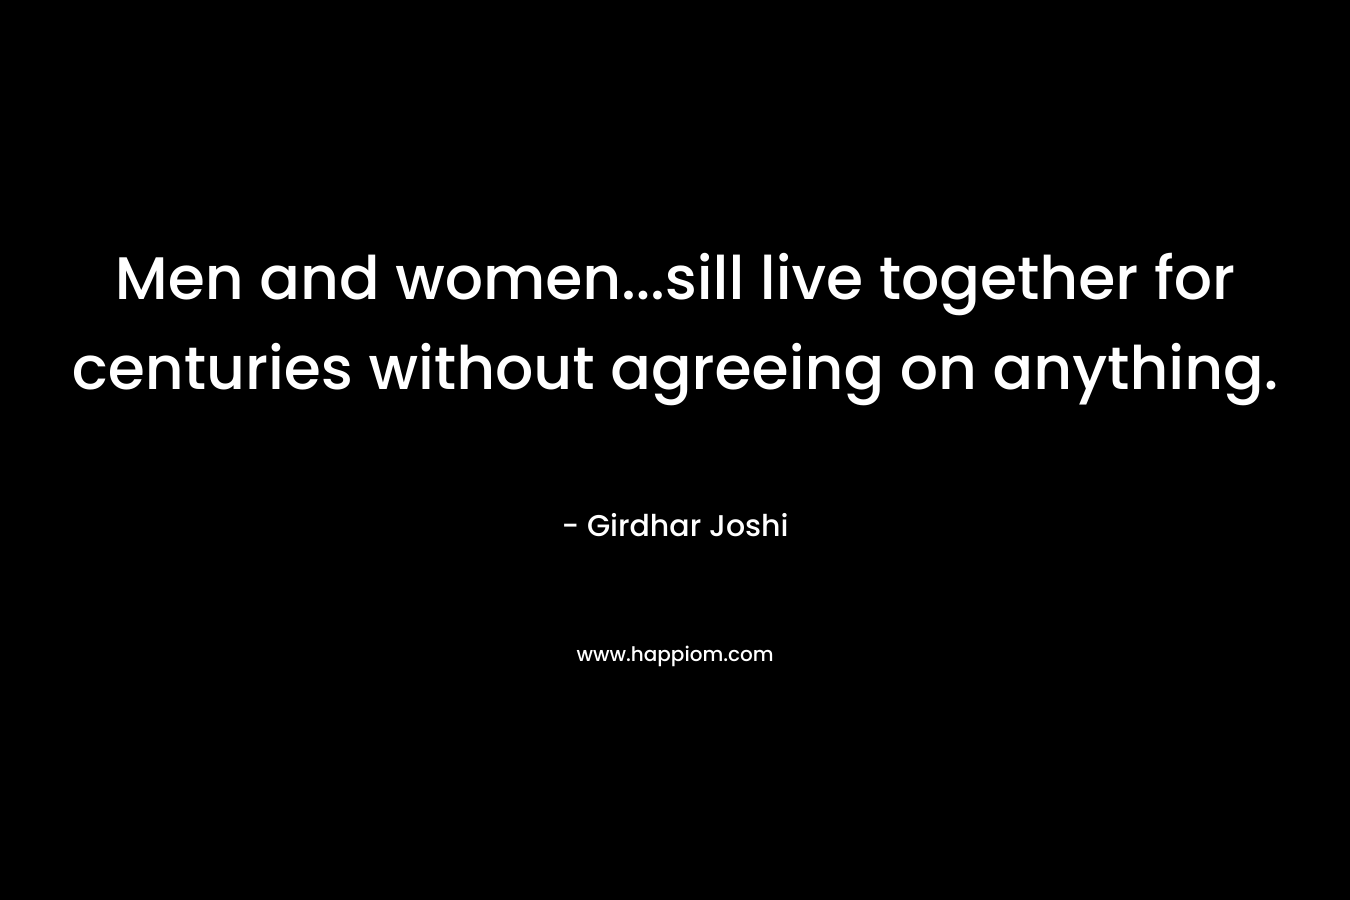 Men and women...sill live together for centuries without agreeing on anything.